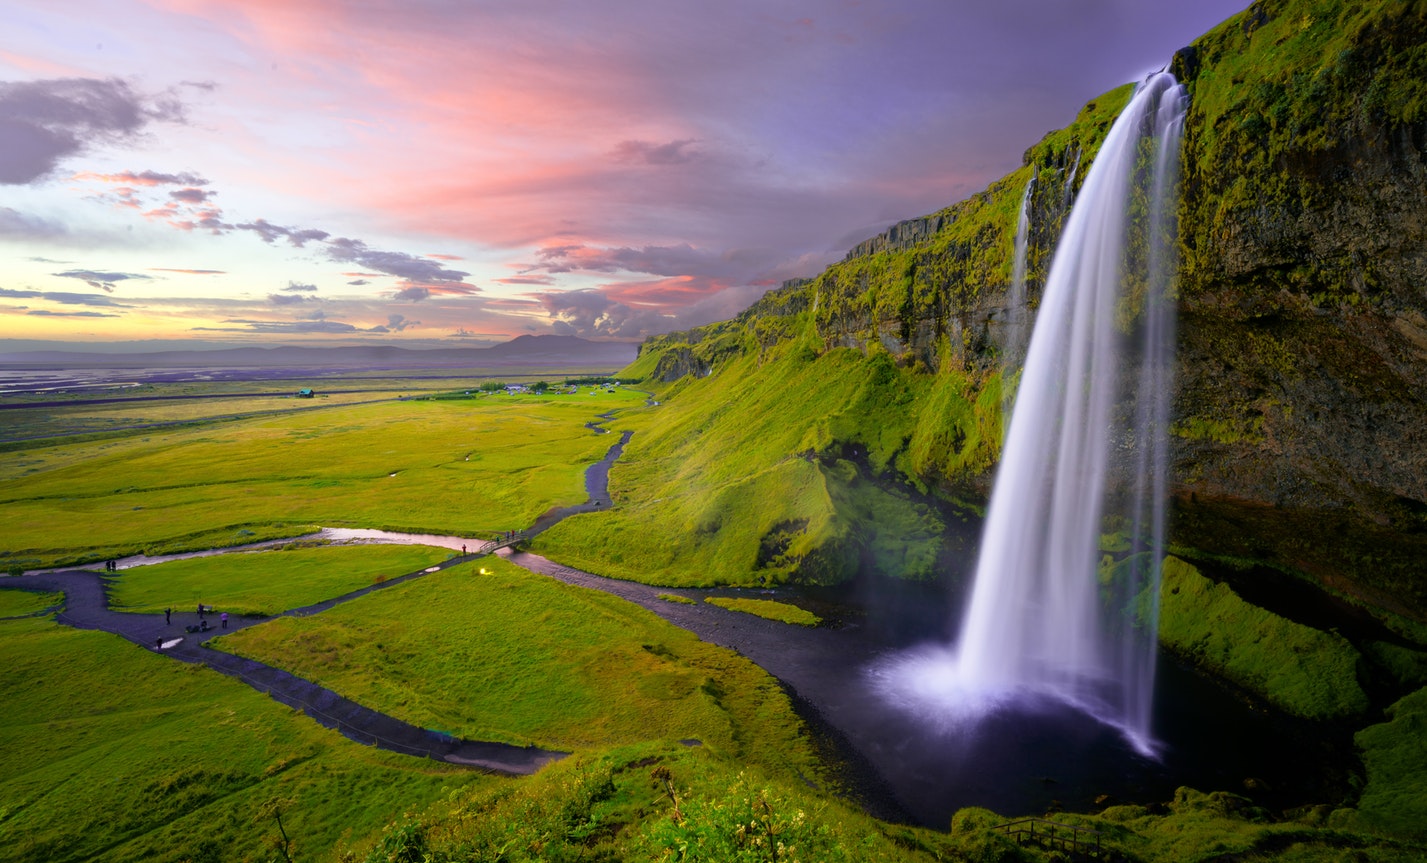 Seljalandsfoss - one of the most famous waterfalls in Iceland